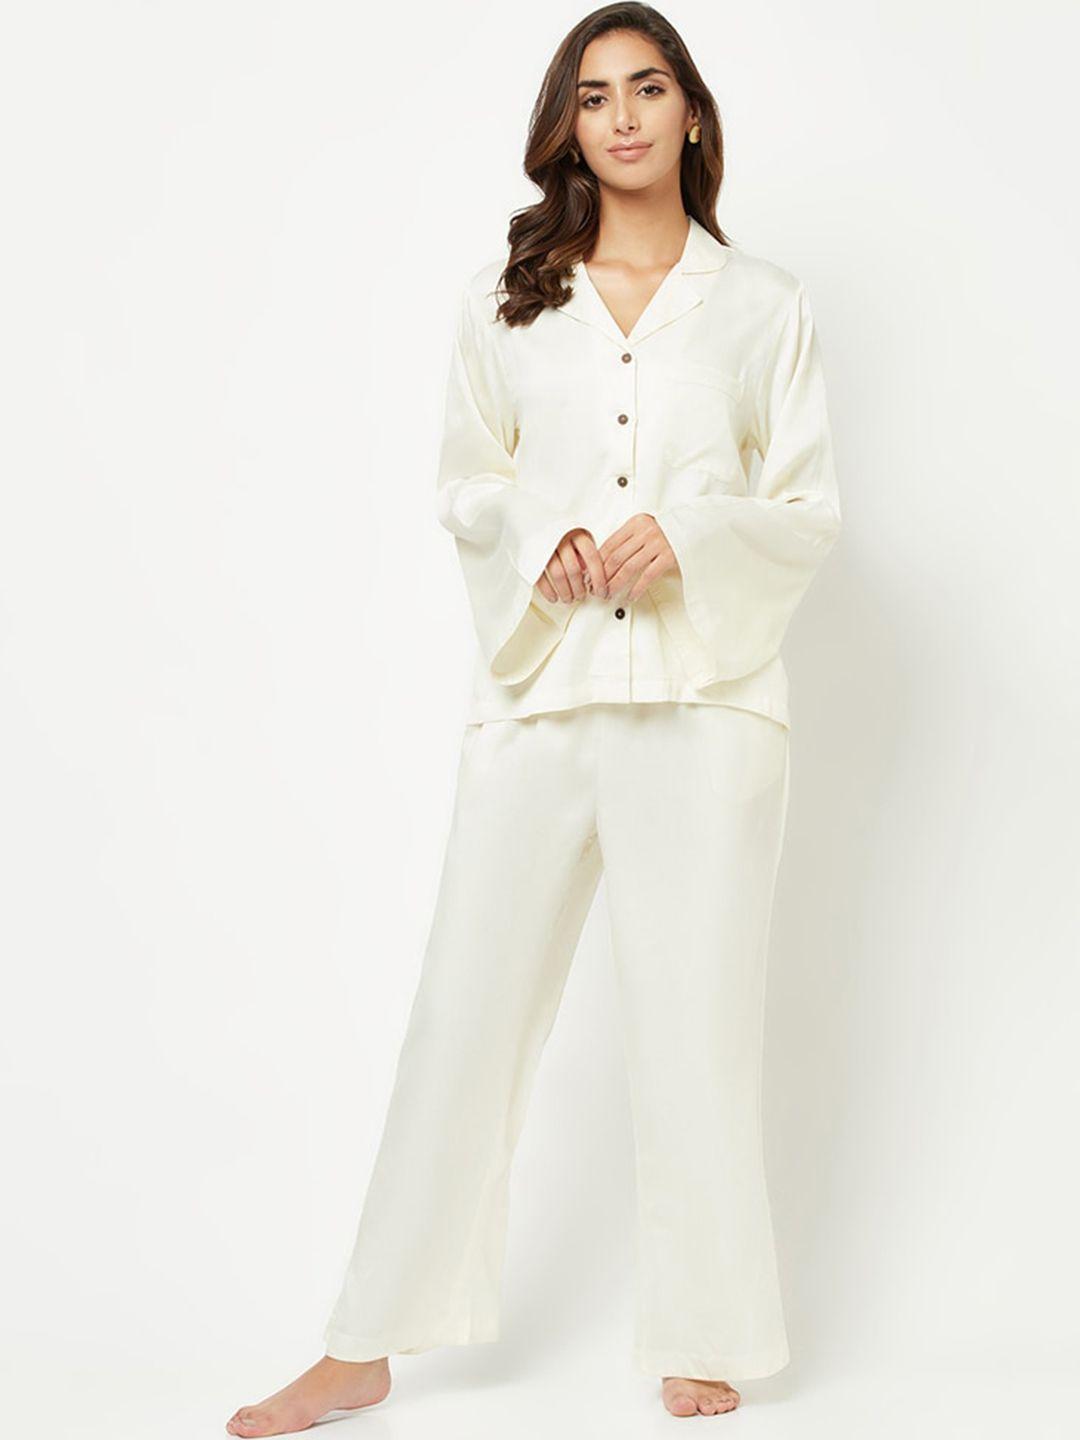 house-of-s-women-night-suit